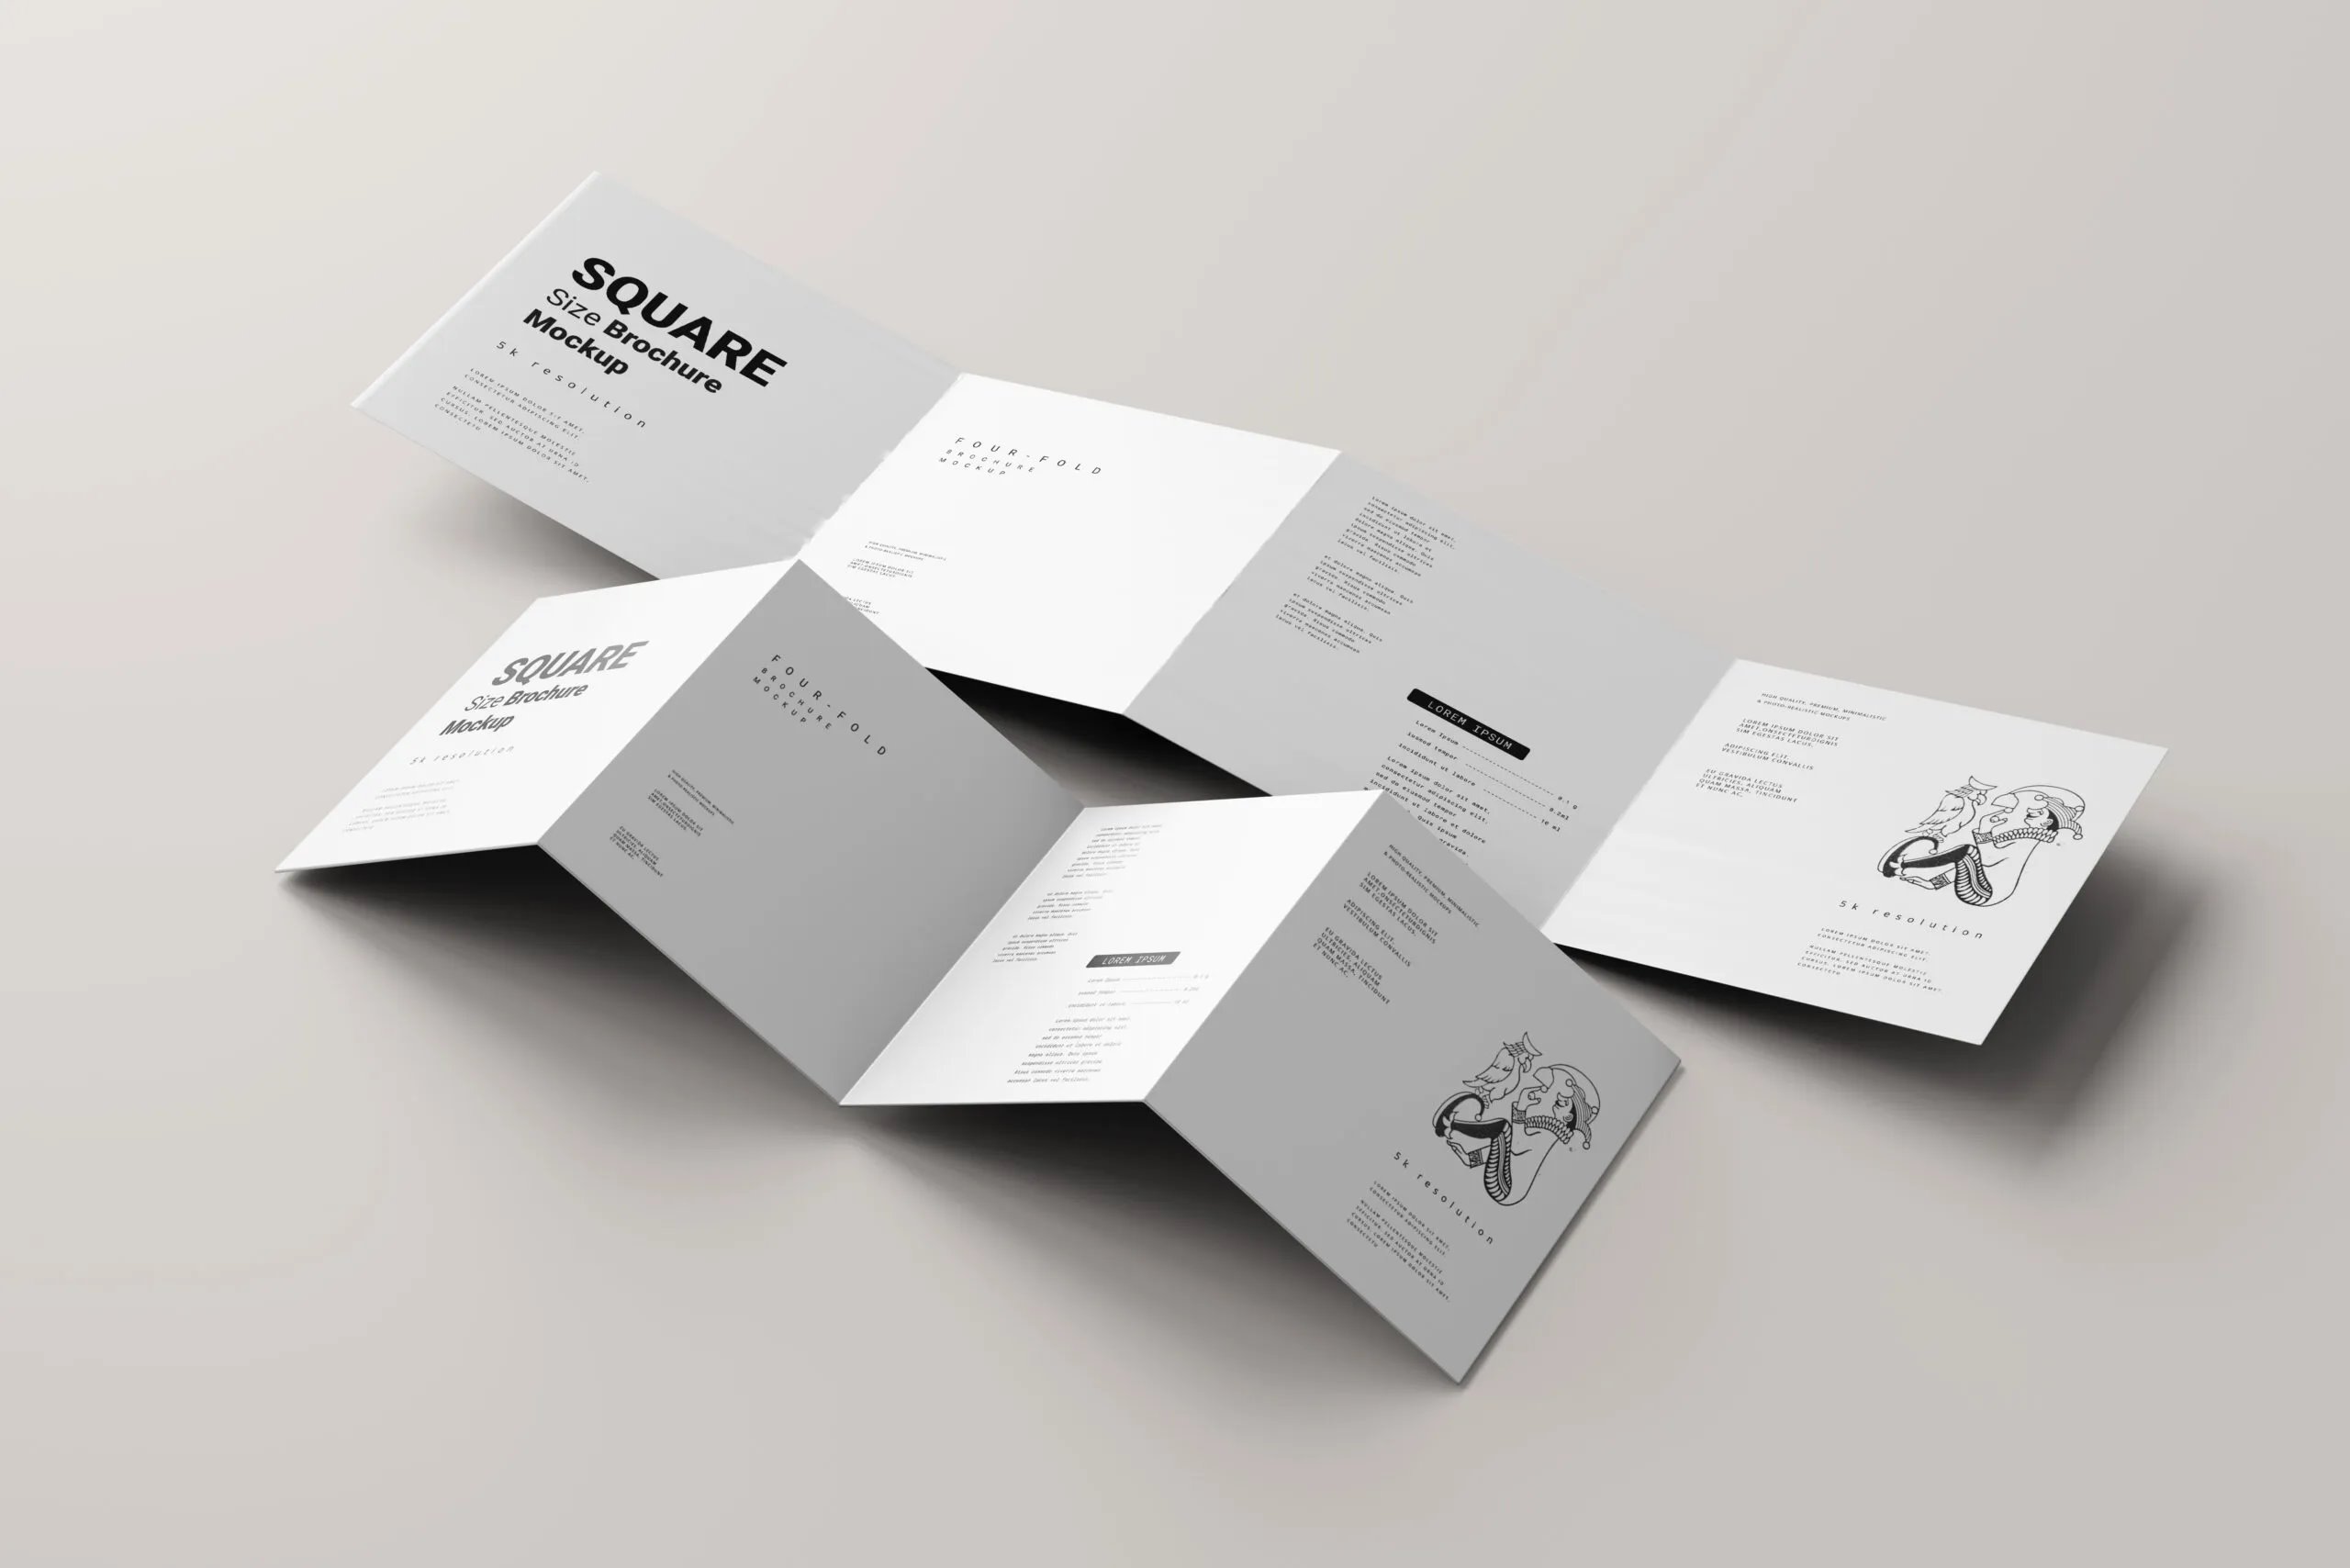 5 Mockups of 4 Fold Square Brochures in Varied Sights FREE PSD